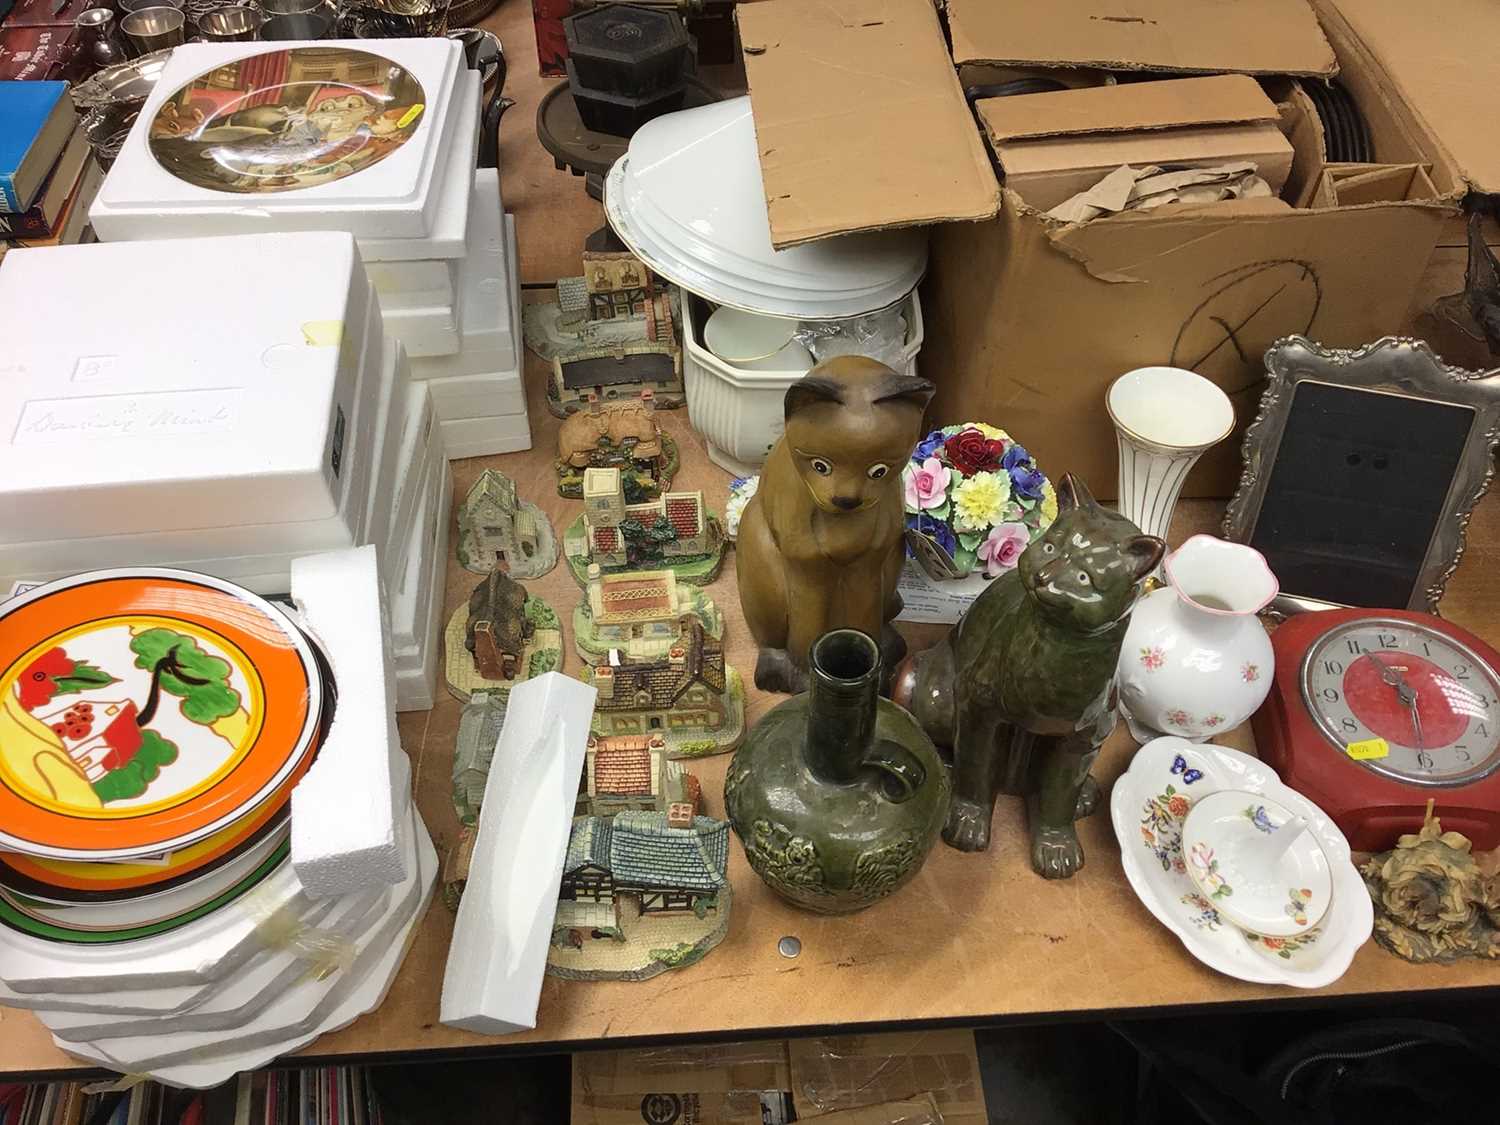 Lot 275 - Memory Lane and Lilliput Lane cottages, collectors plates, decorative china and two ornamental cats